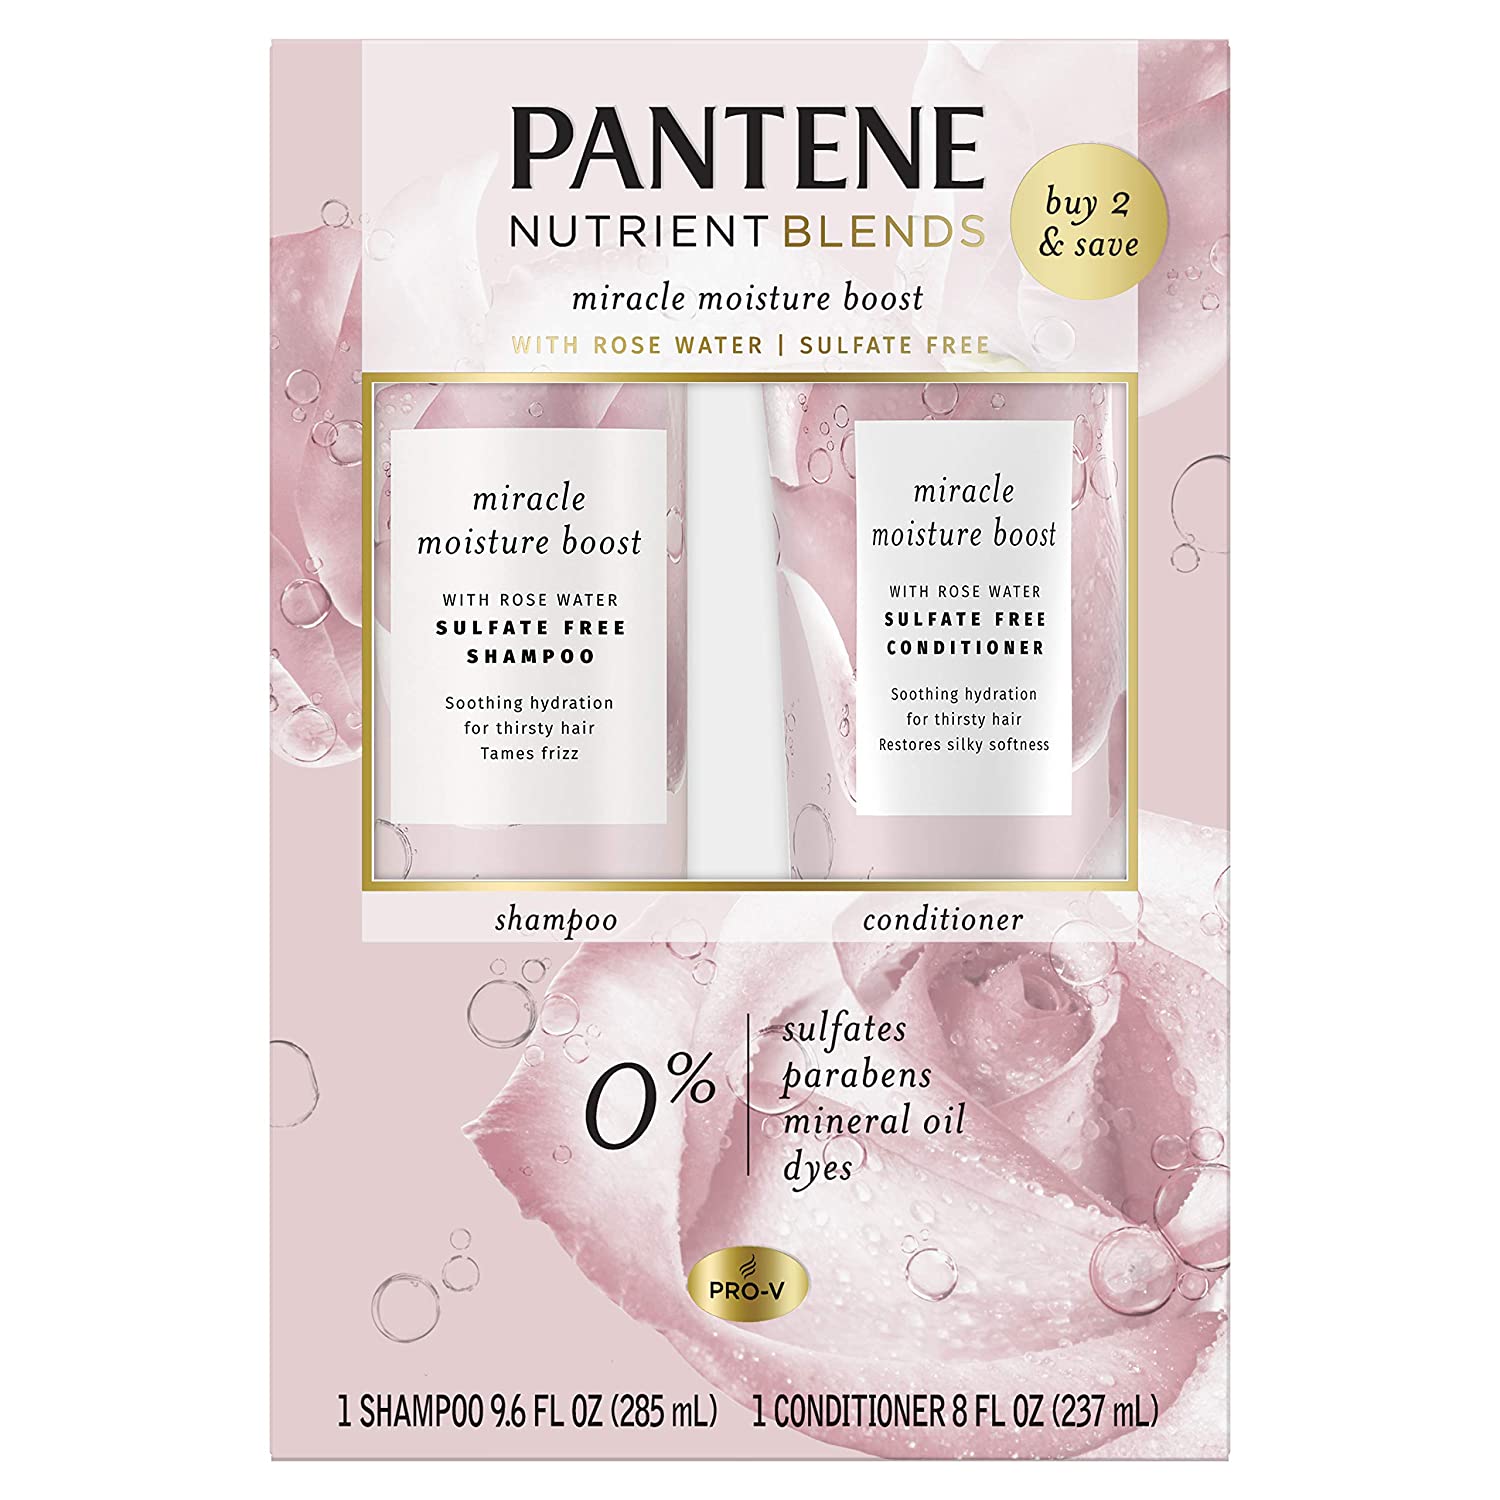 Pantene Nutrient Blends Miracle Moisture Boost Rose Water Shampoo & Conditioner Bundle $5.62 w/ S&S + Free Shipping w/ Prime or $25+